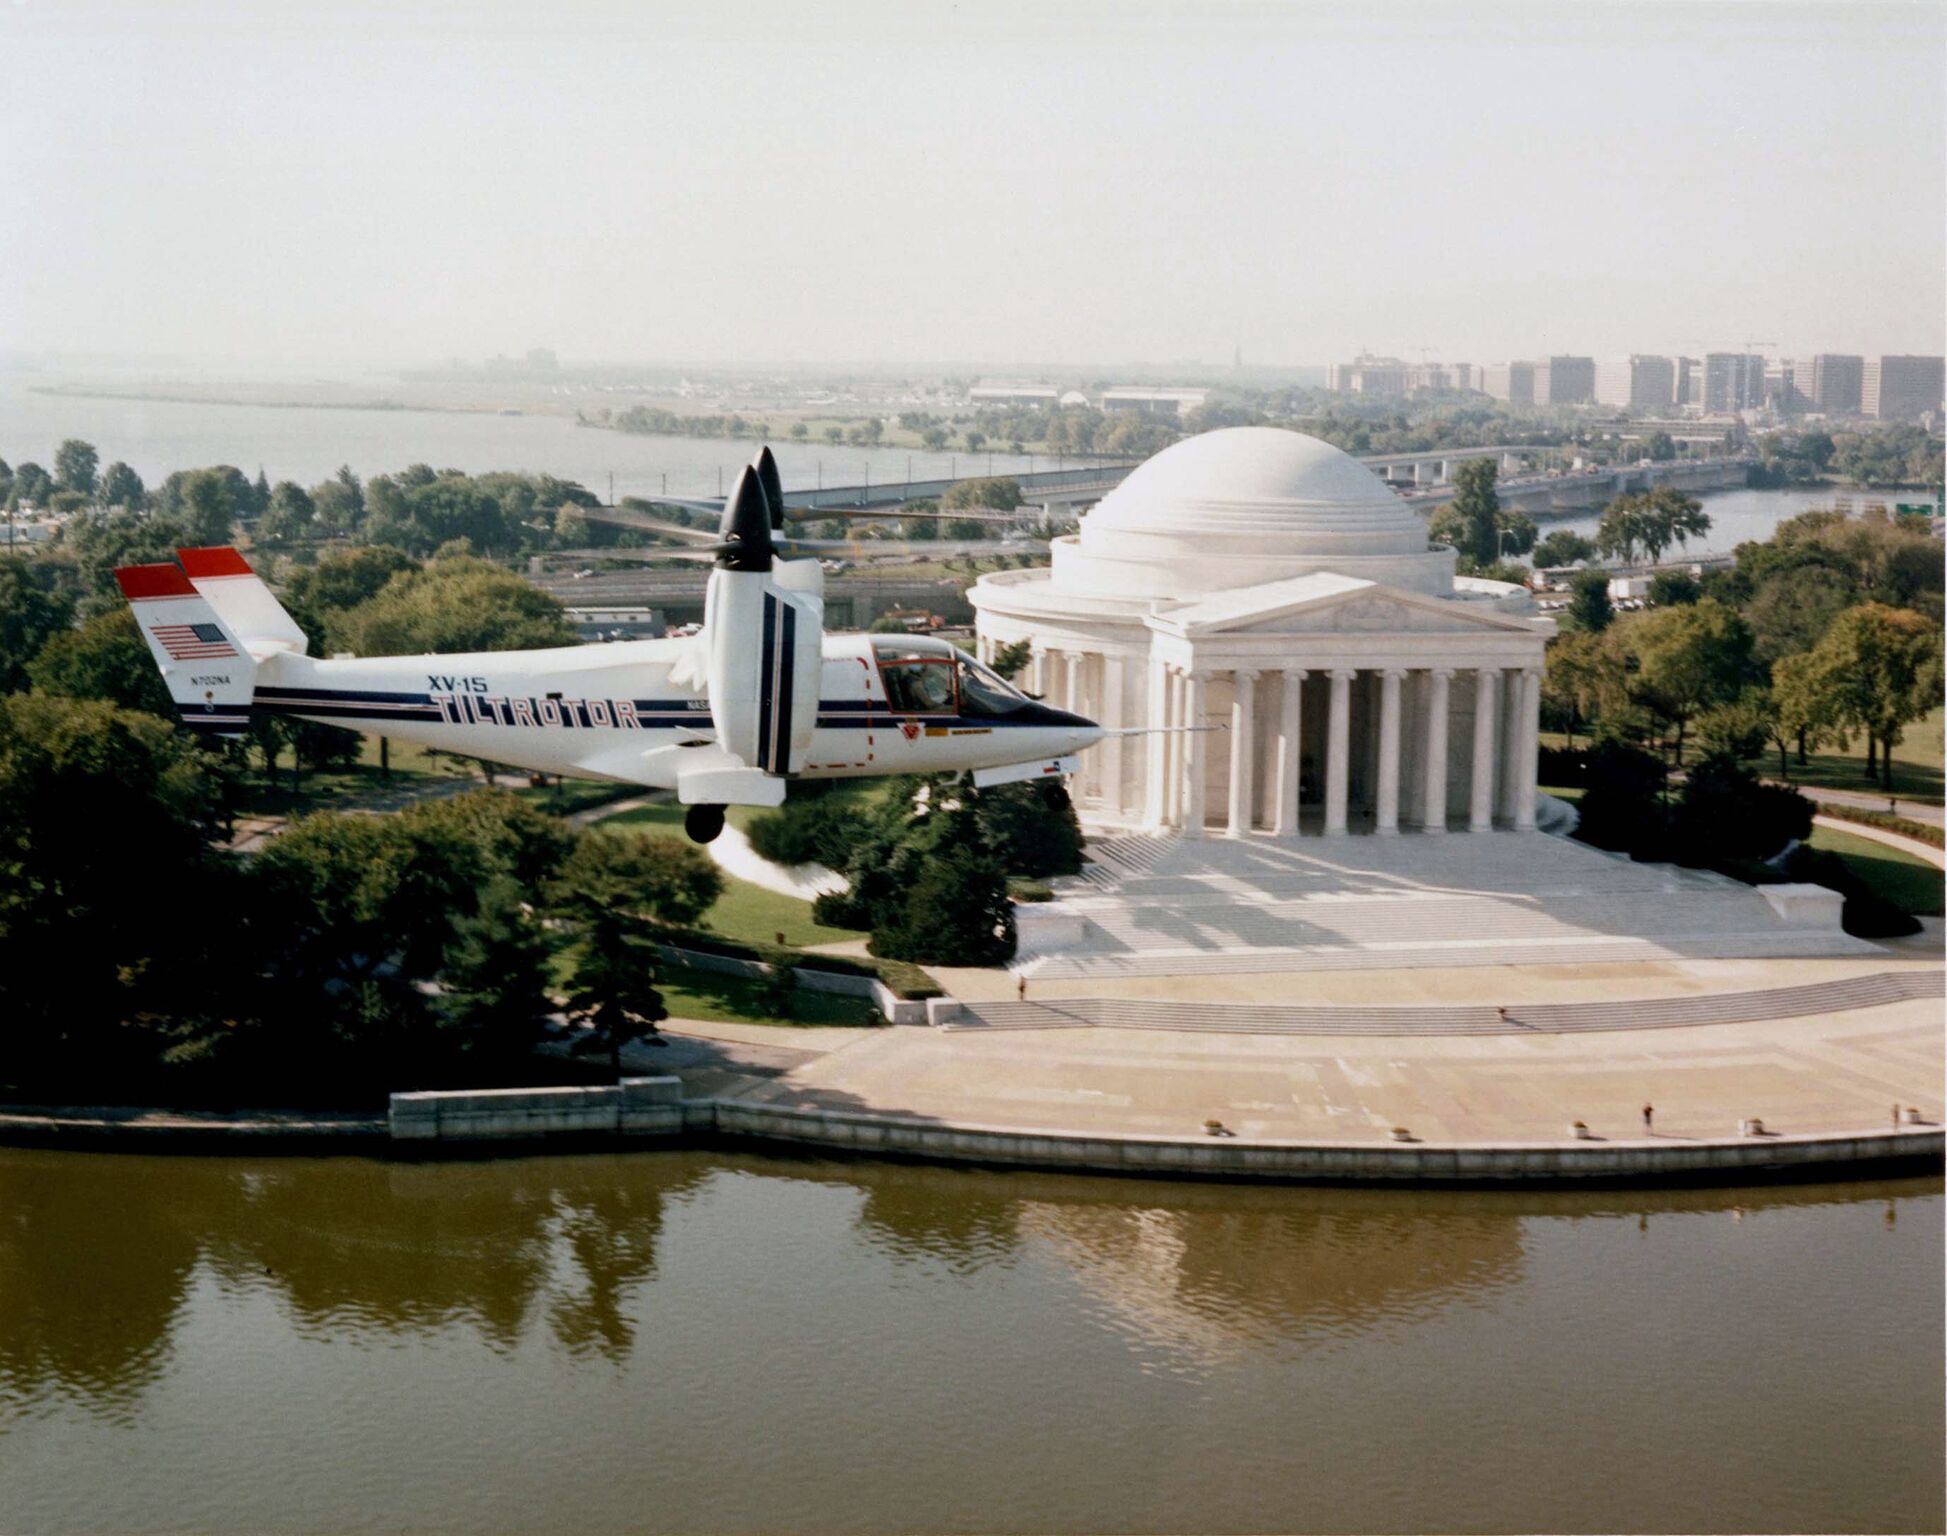 The XV-15 in flight by the Jefferson Memorial.